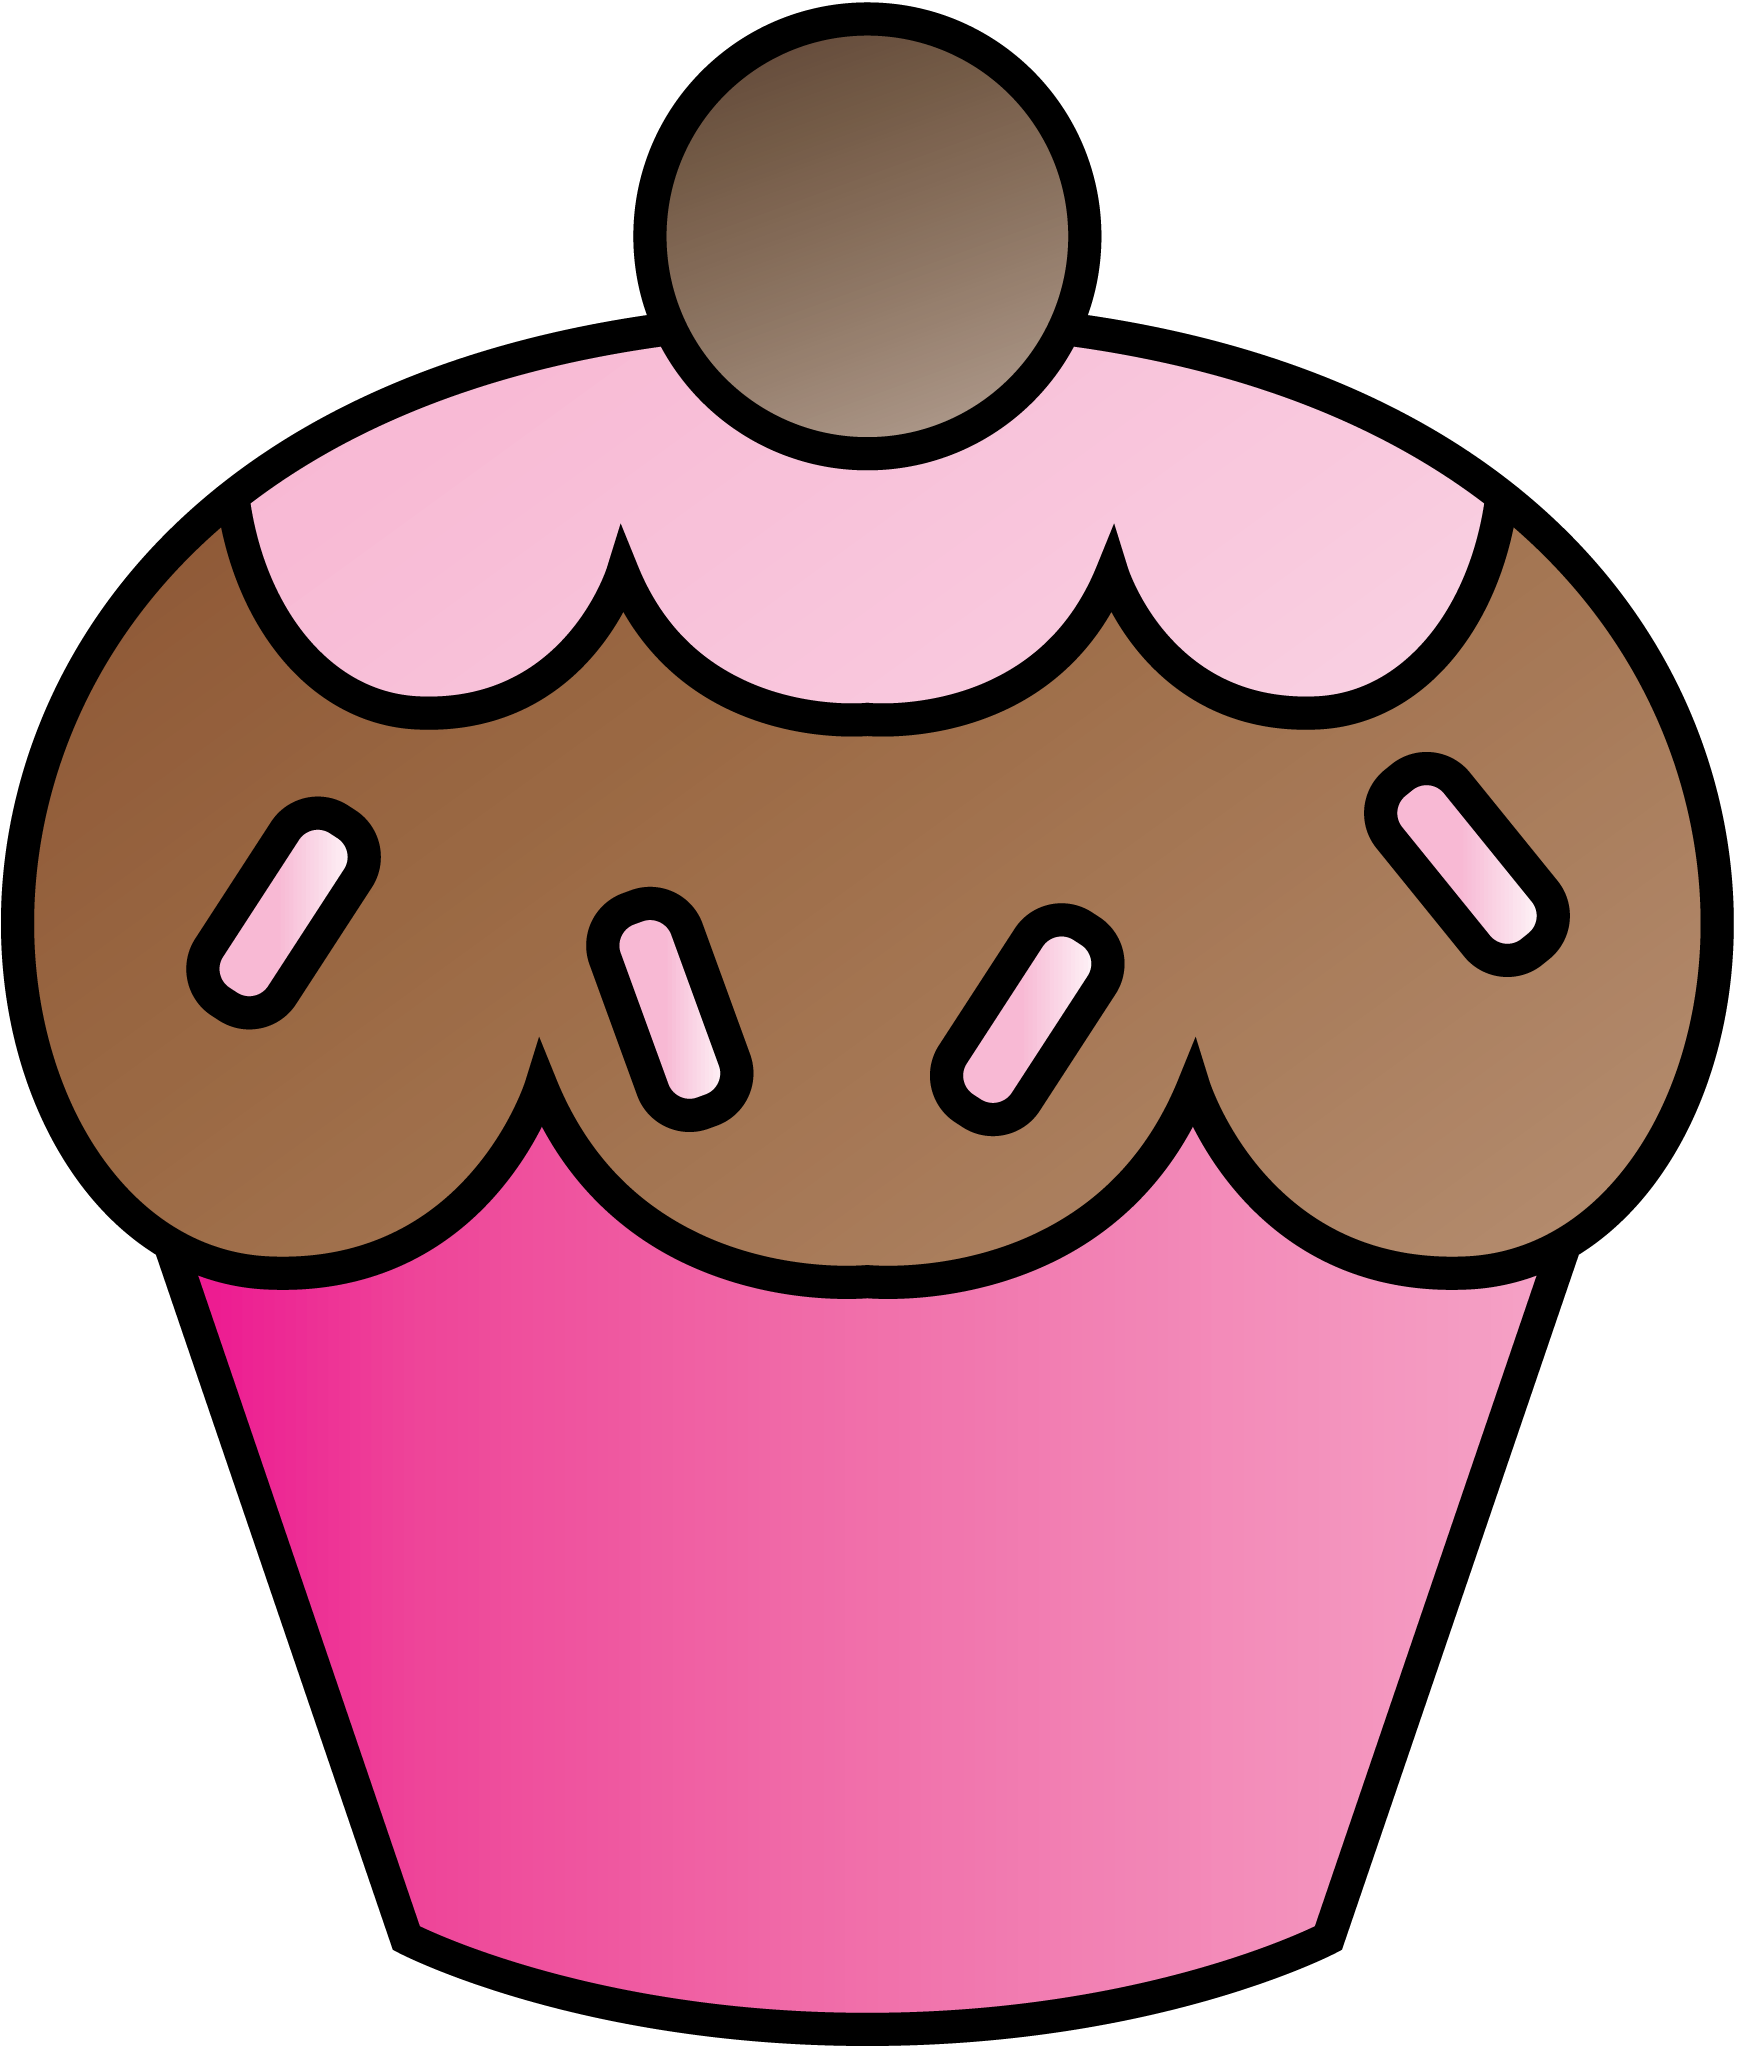 Cupcake Art On Clip Art Cupcake And Pink Cupcakes 2 - Birthday Cupcakes Coloring Pages (1738x2050)